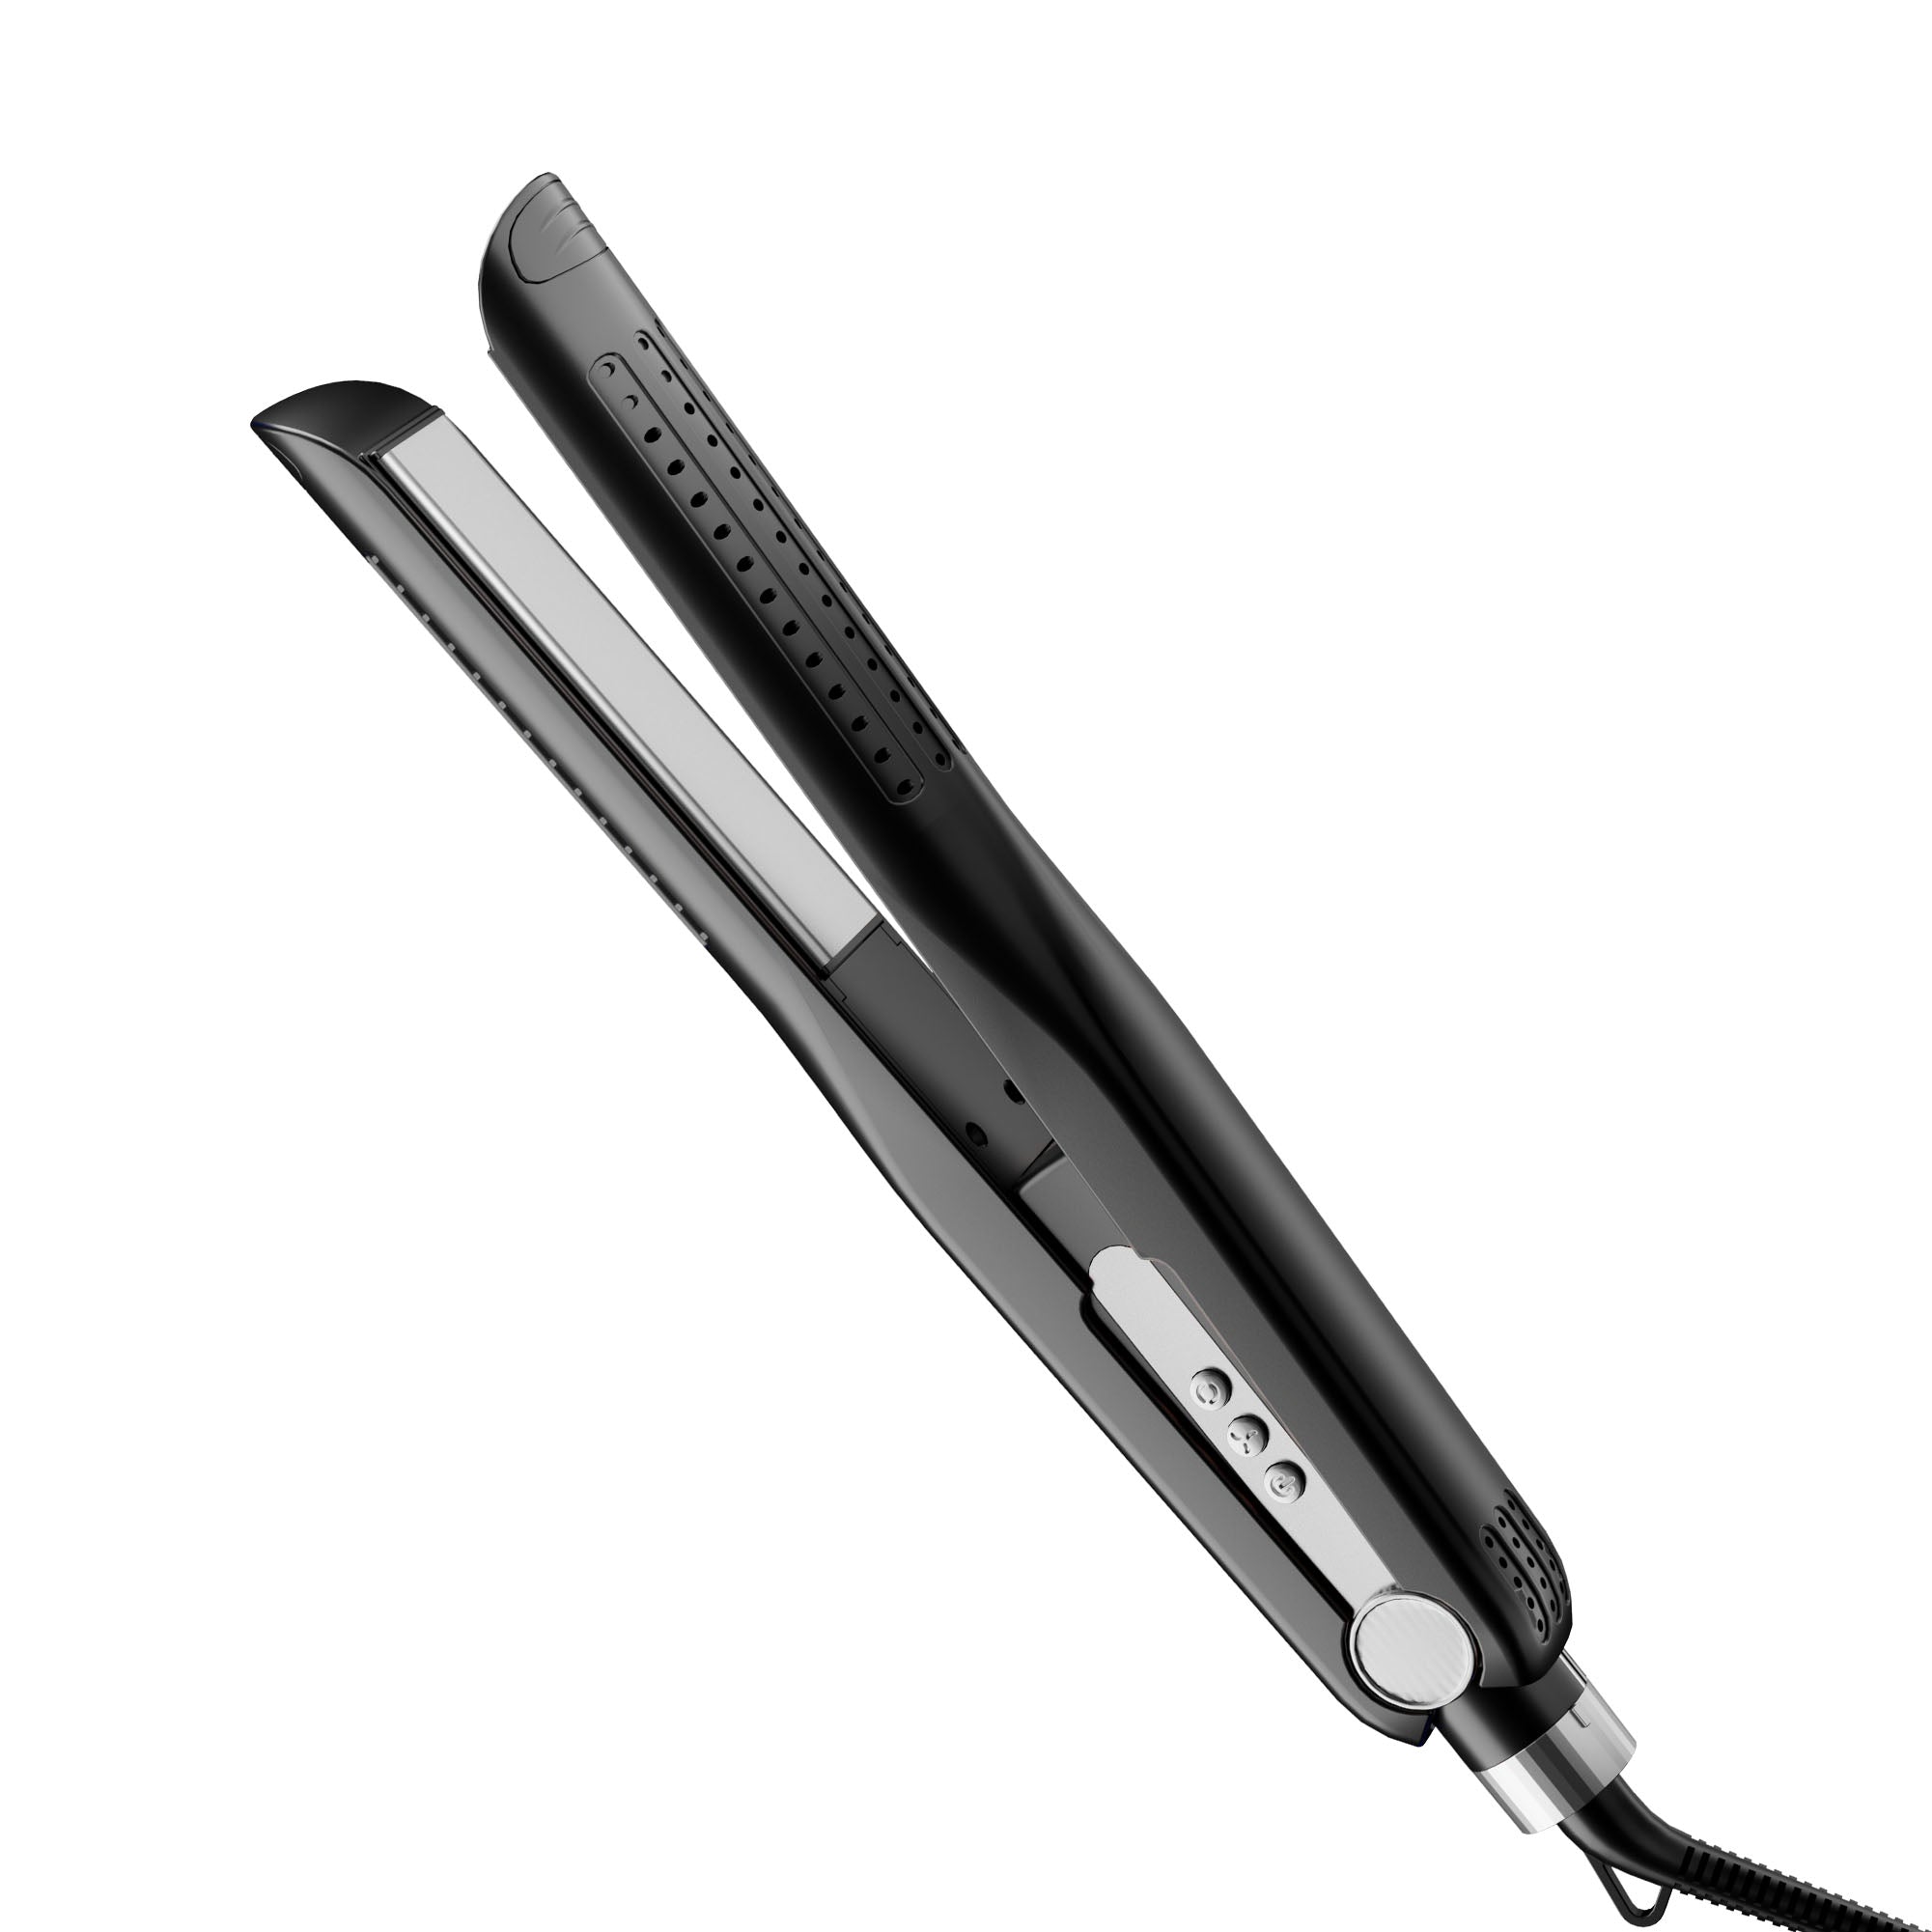 Nicebay by Whall Hair Straightener Flat Iron, Hair Straightener and Curler-5 Temp, Fast Heating, Wide Voltage